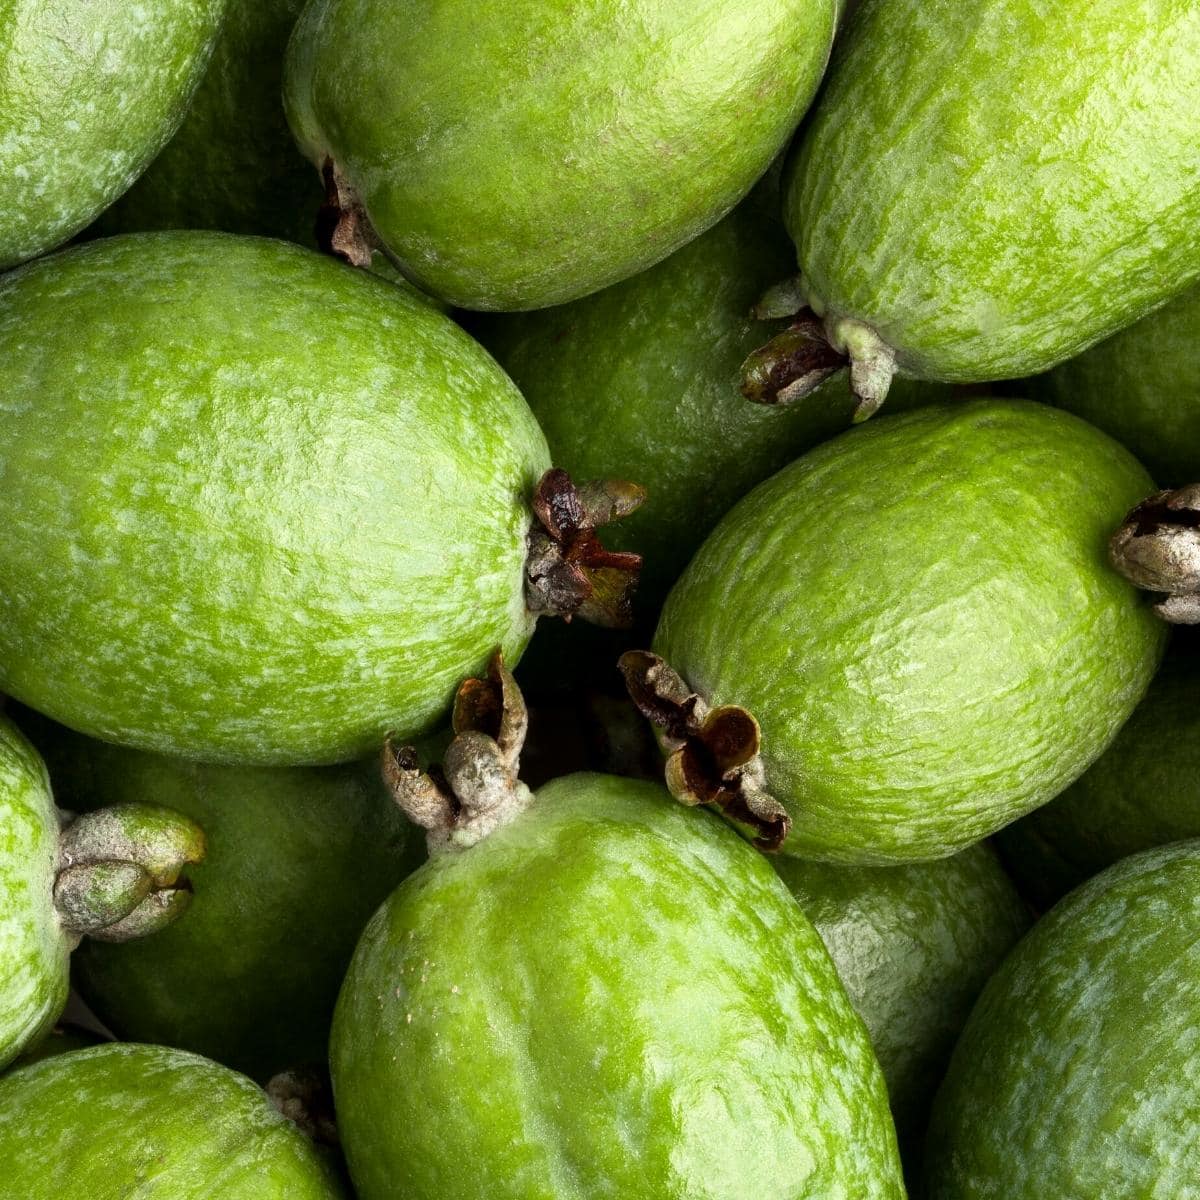 Bright green feijoa fruit in a large pile.